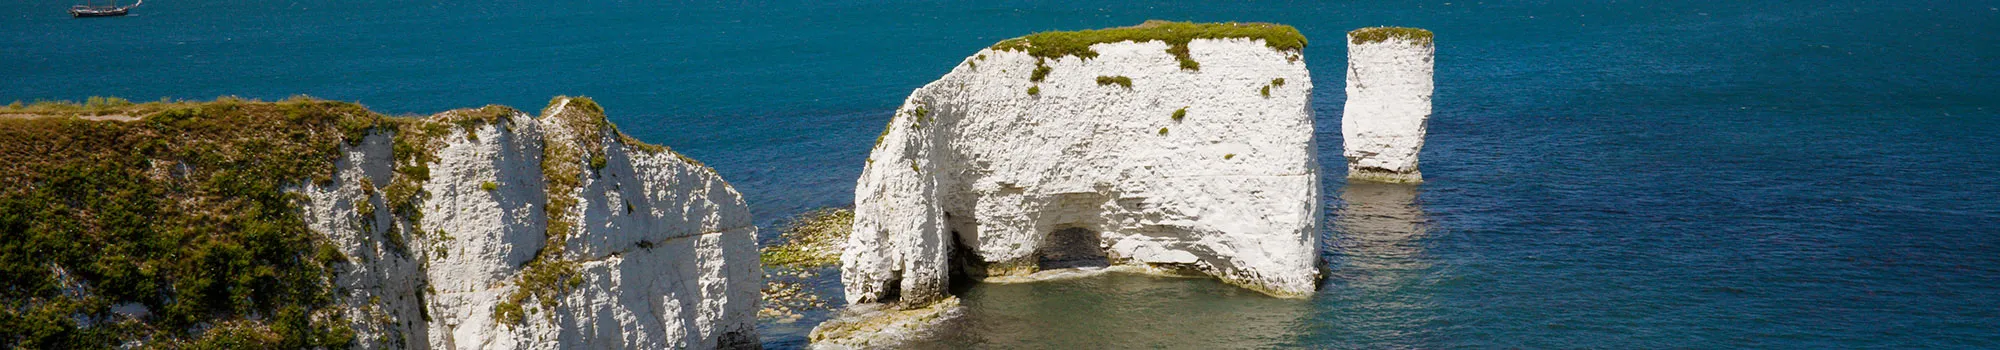 Learn more about the Isle of Purbeck